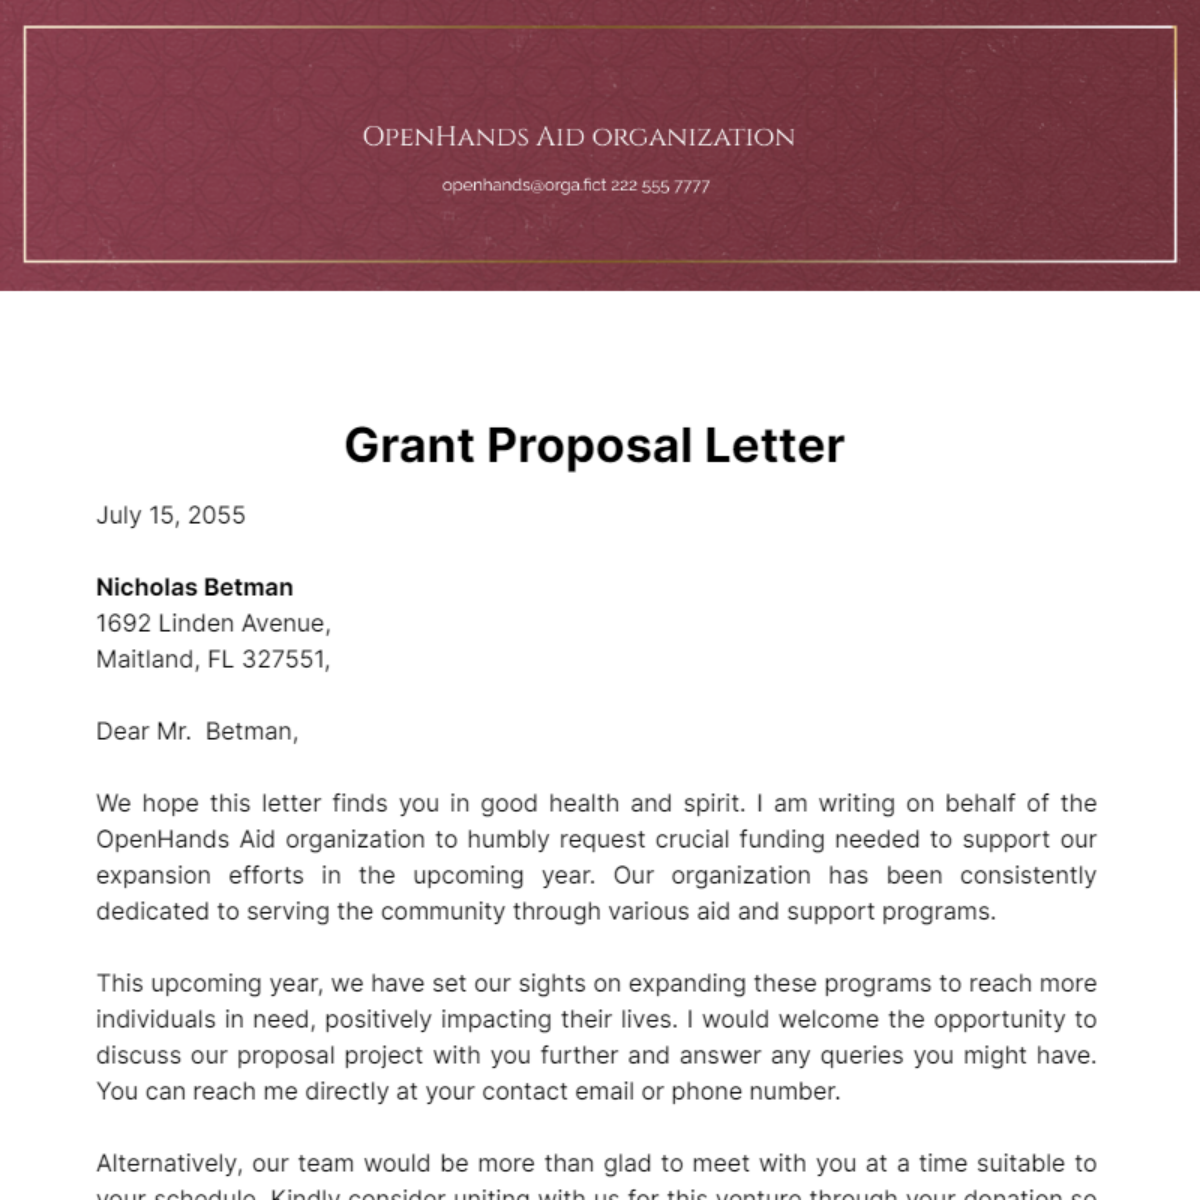 Grant Proposal Letter Template